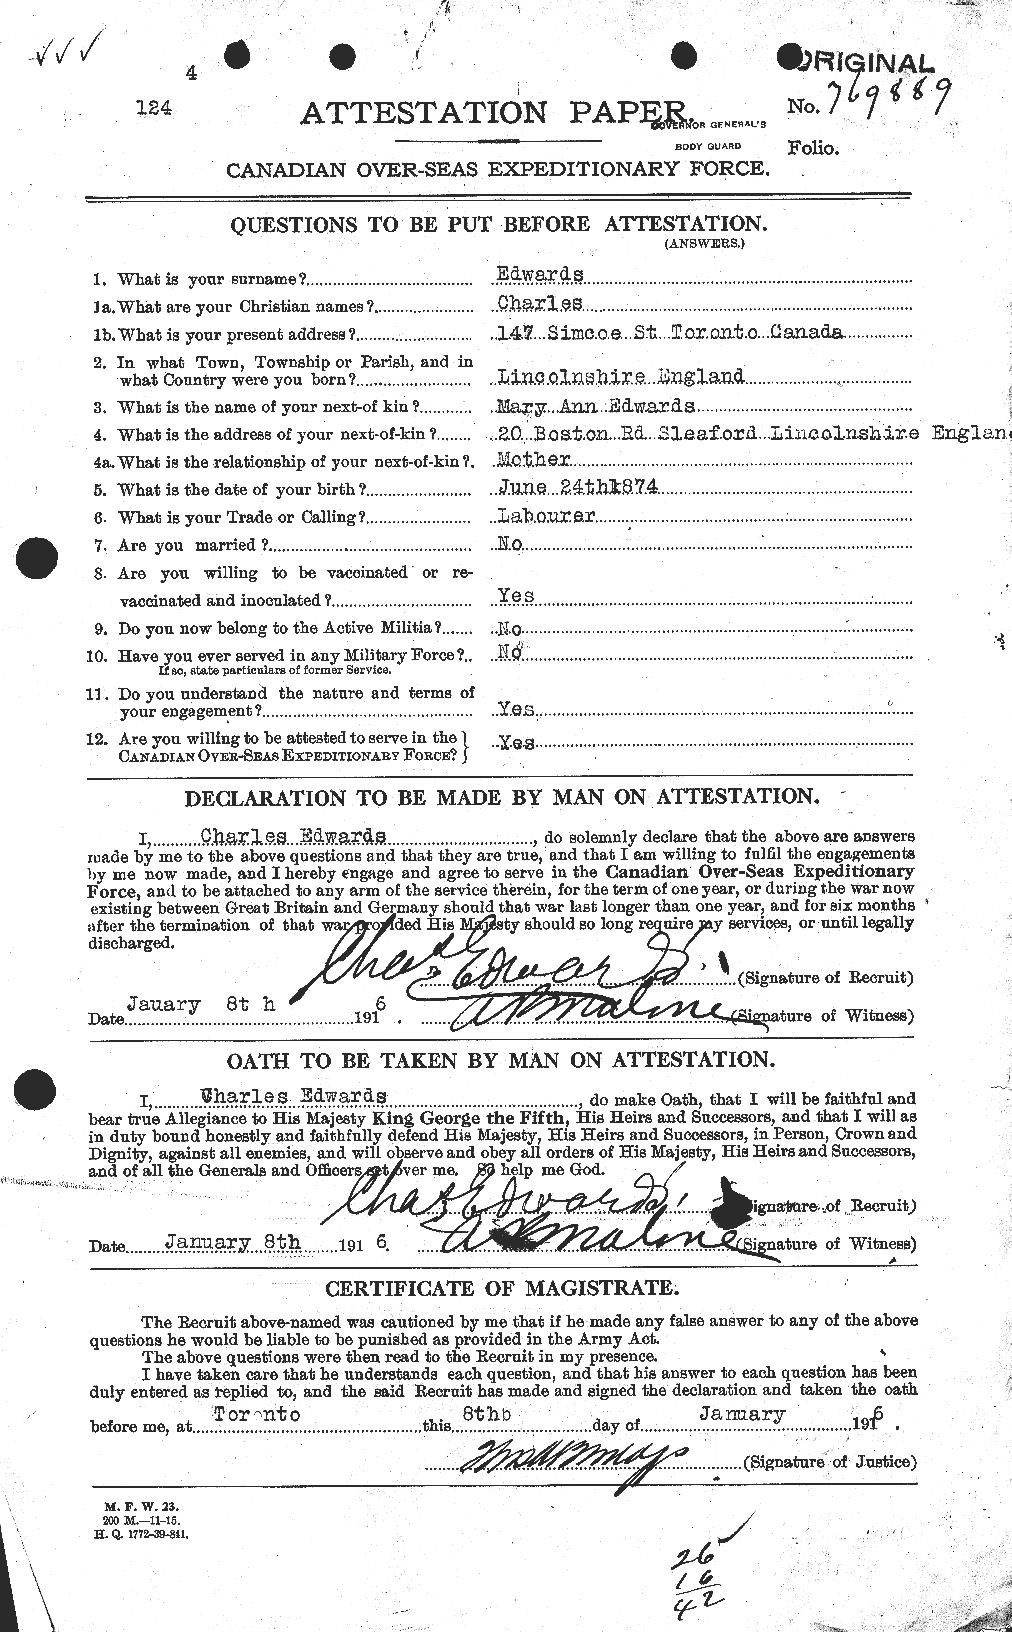 Personnel Records of the First World War - CEF 307818a